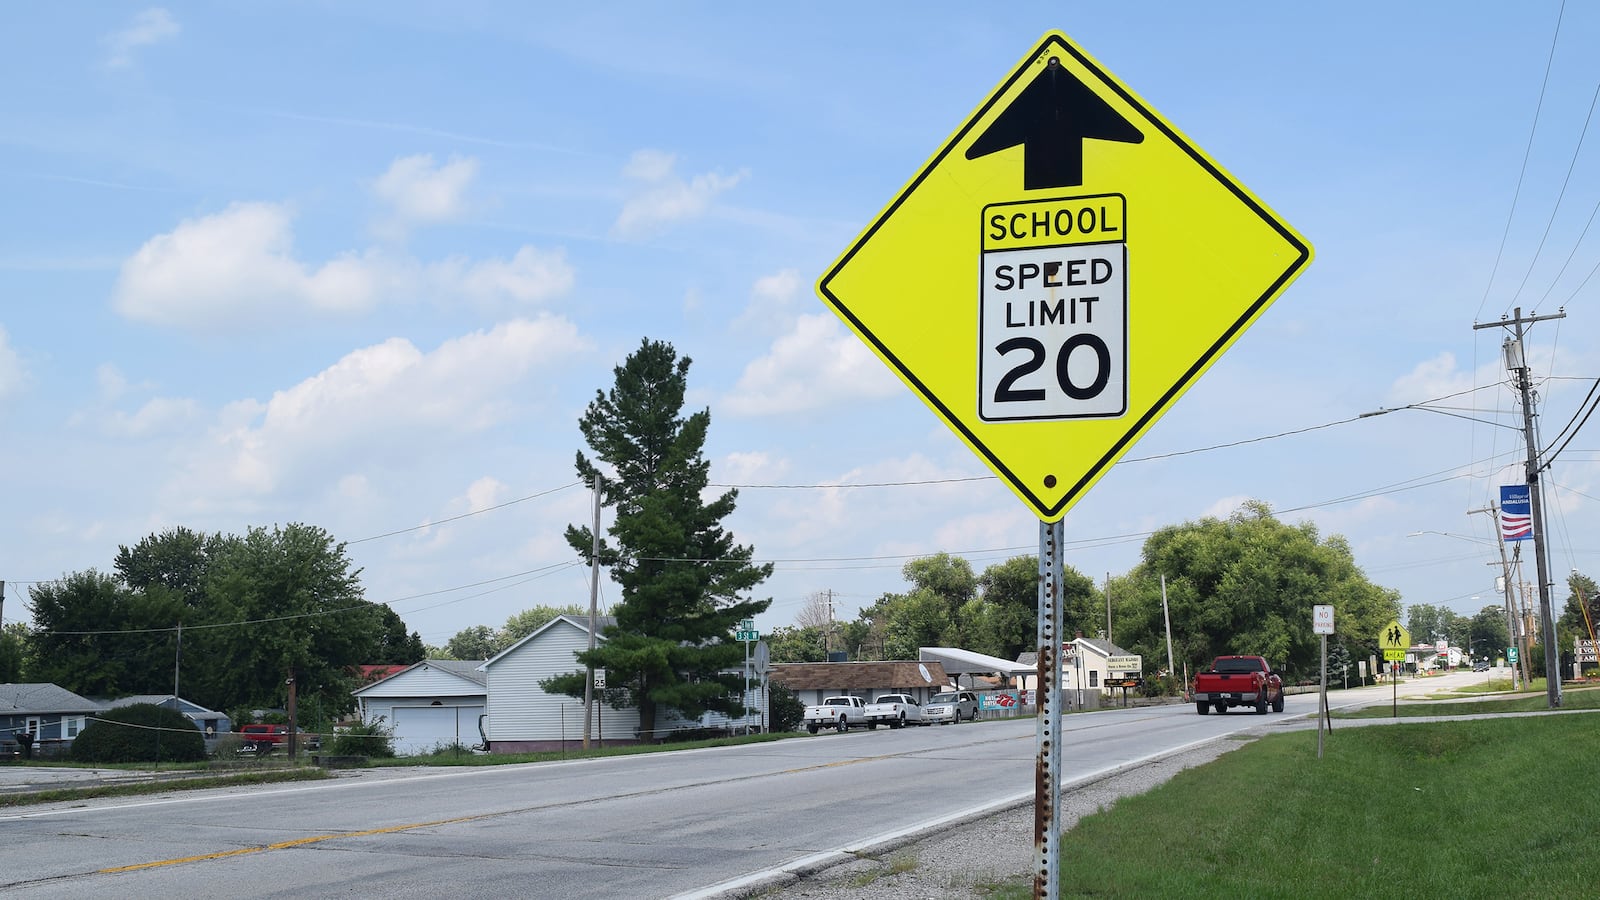 A school speed limit sign in Andalusia, Illinois, a village nearby the Illinois and 